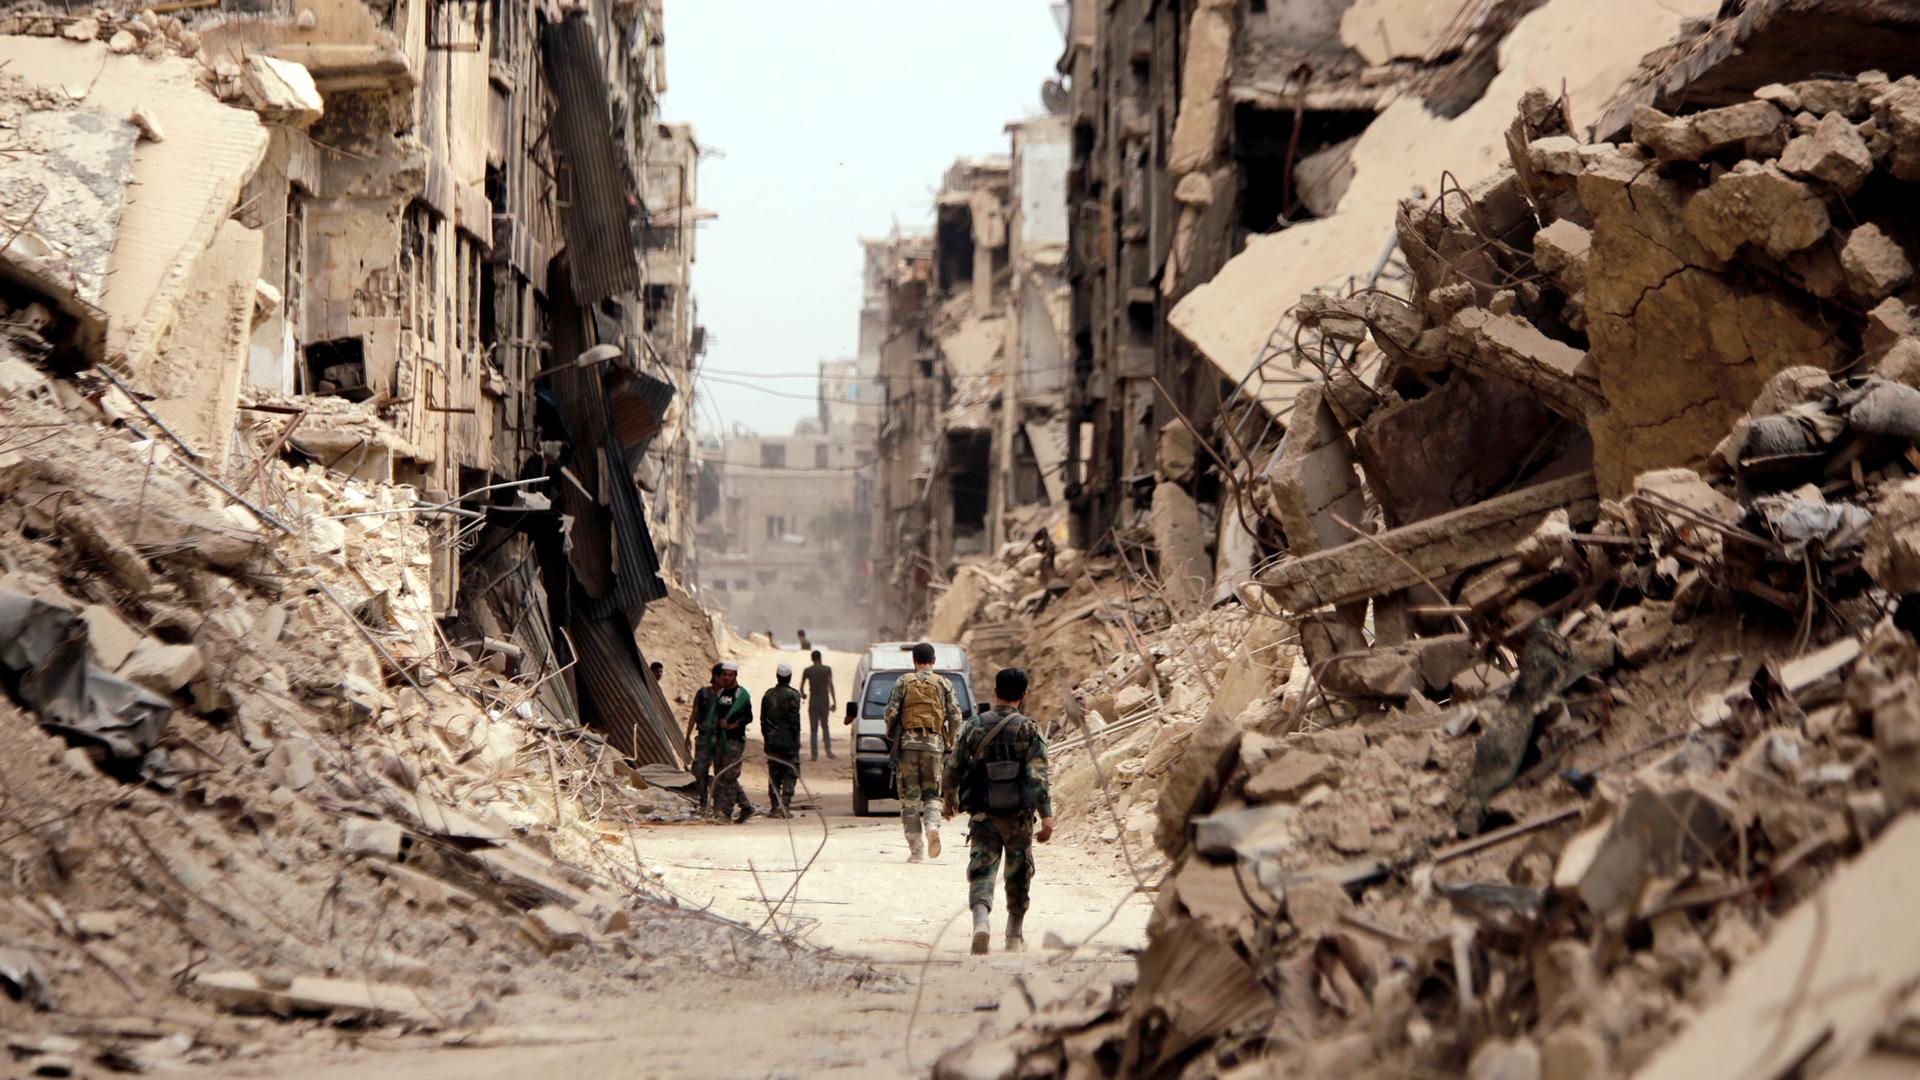 Men in camouflague fatigues walk down a street lined with rubble from destroyed buildings.